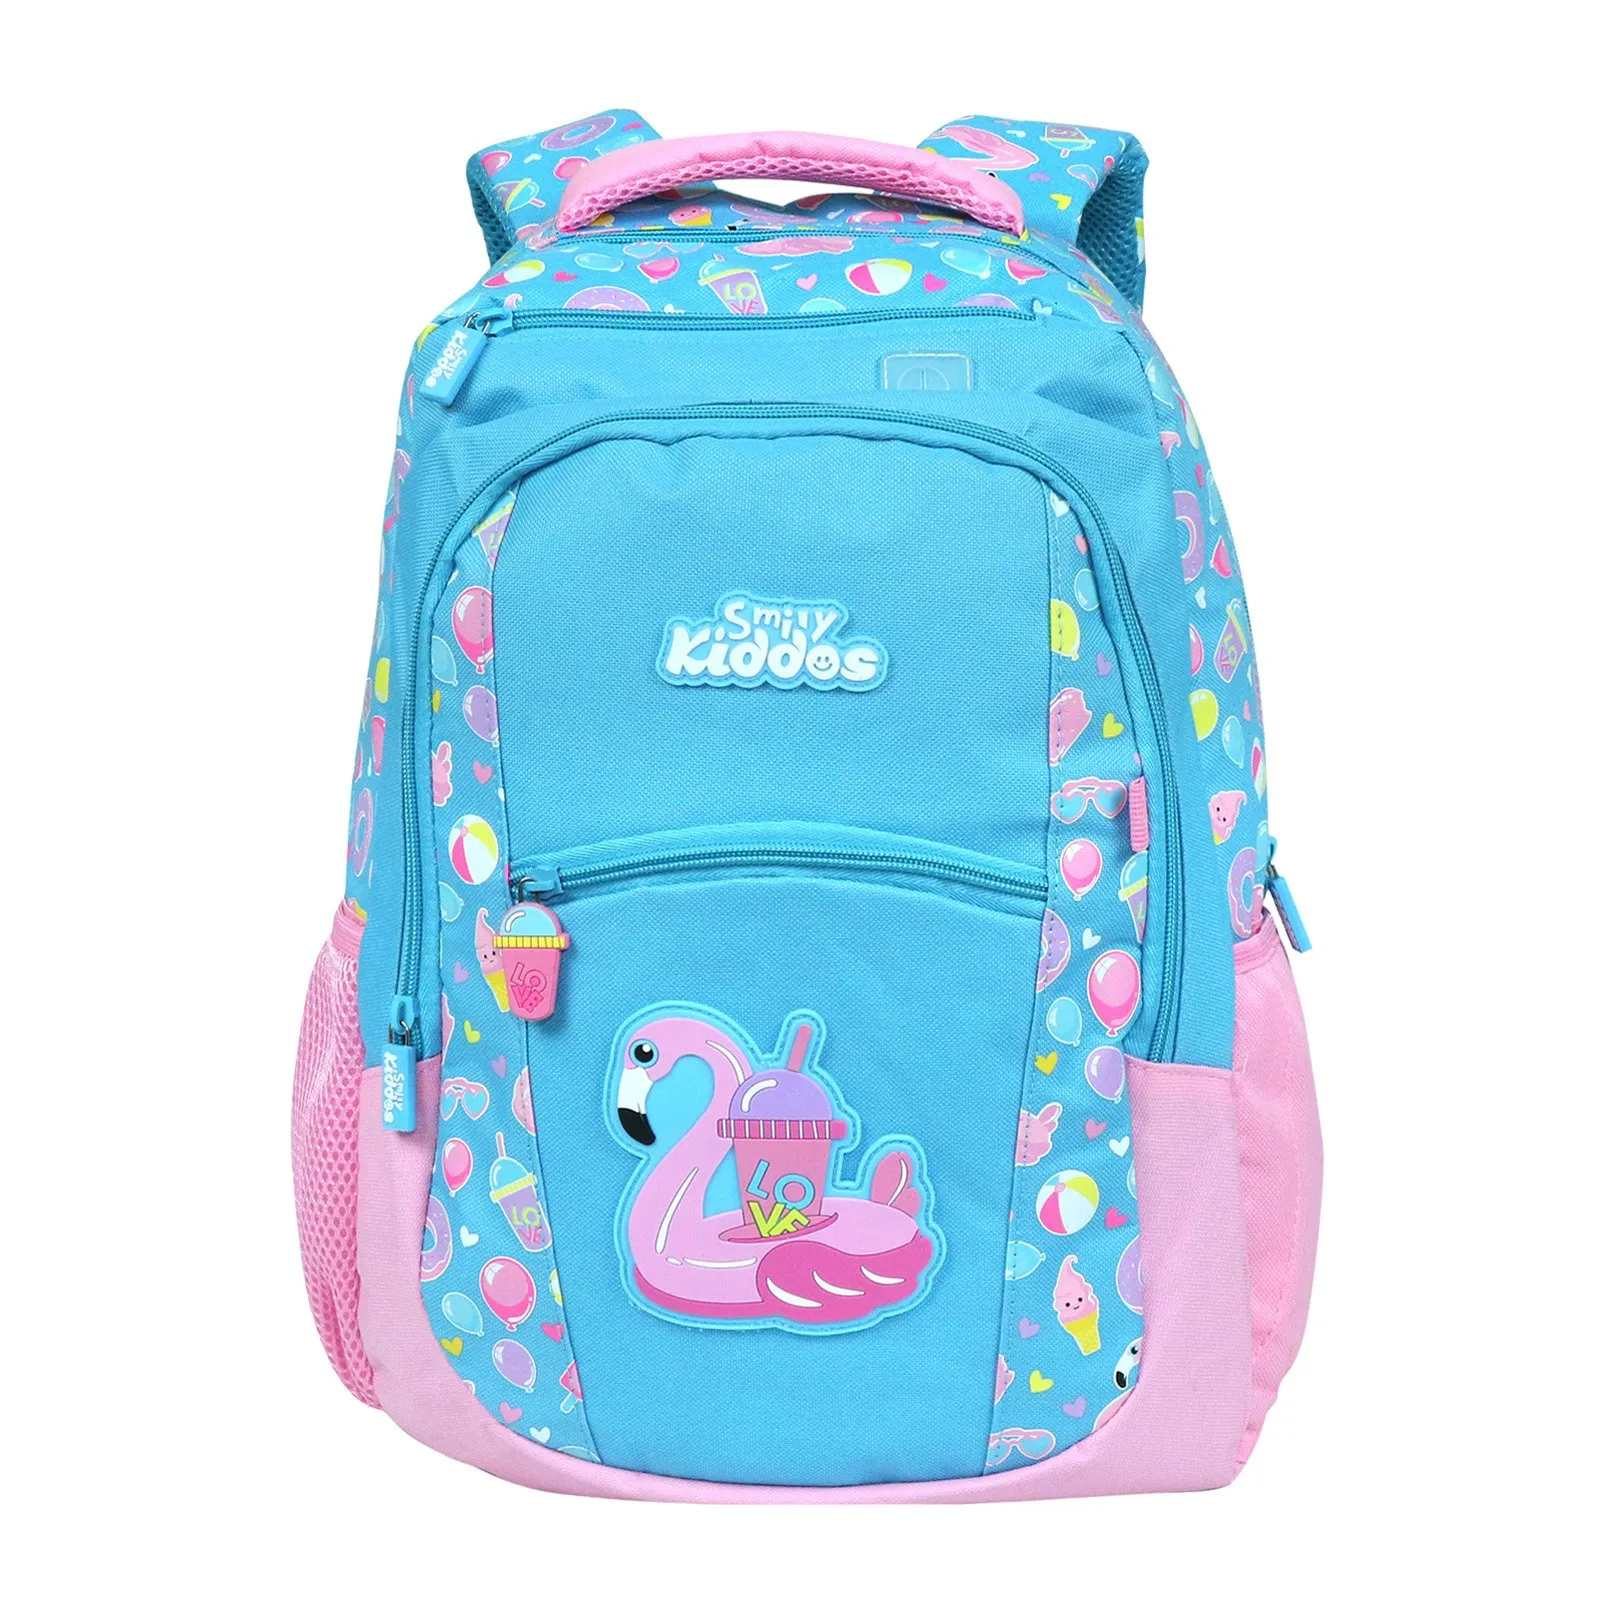 Smily Dual Color Backpack_Turquoise blue